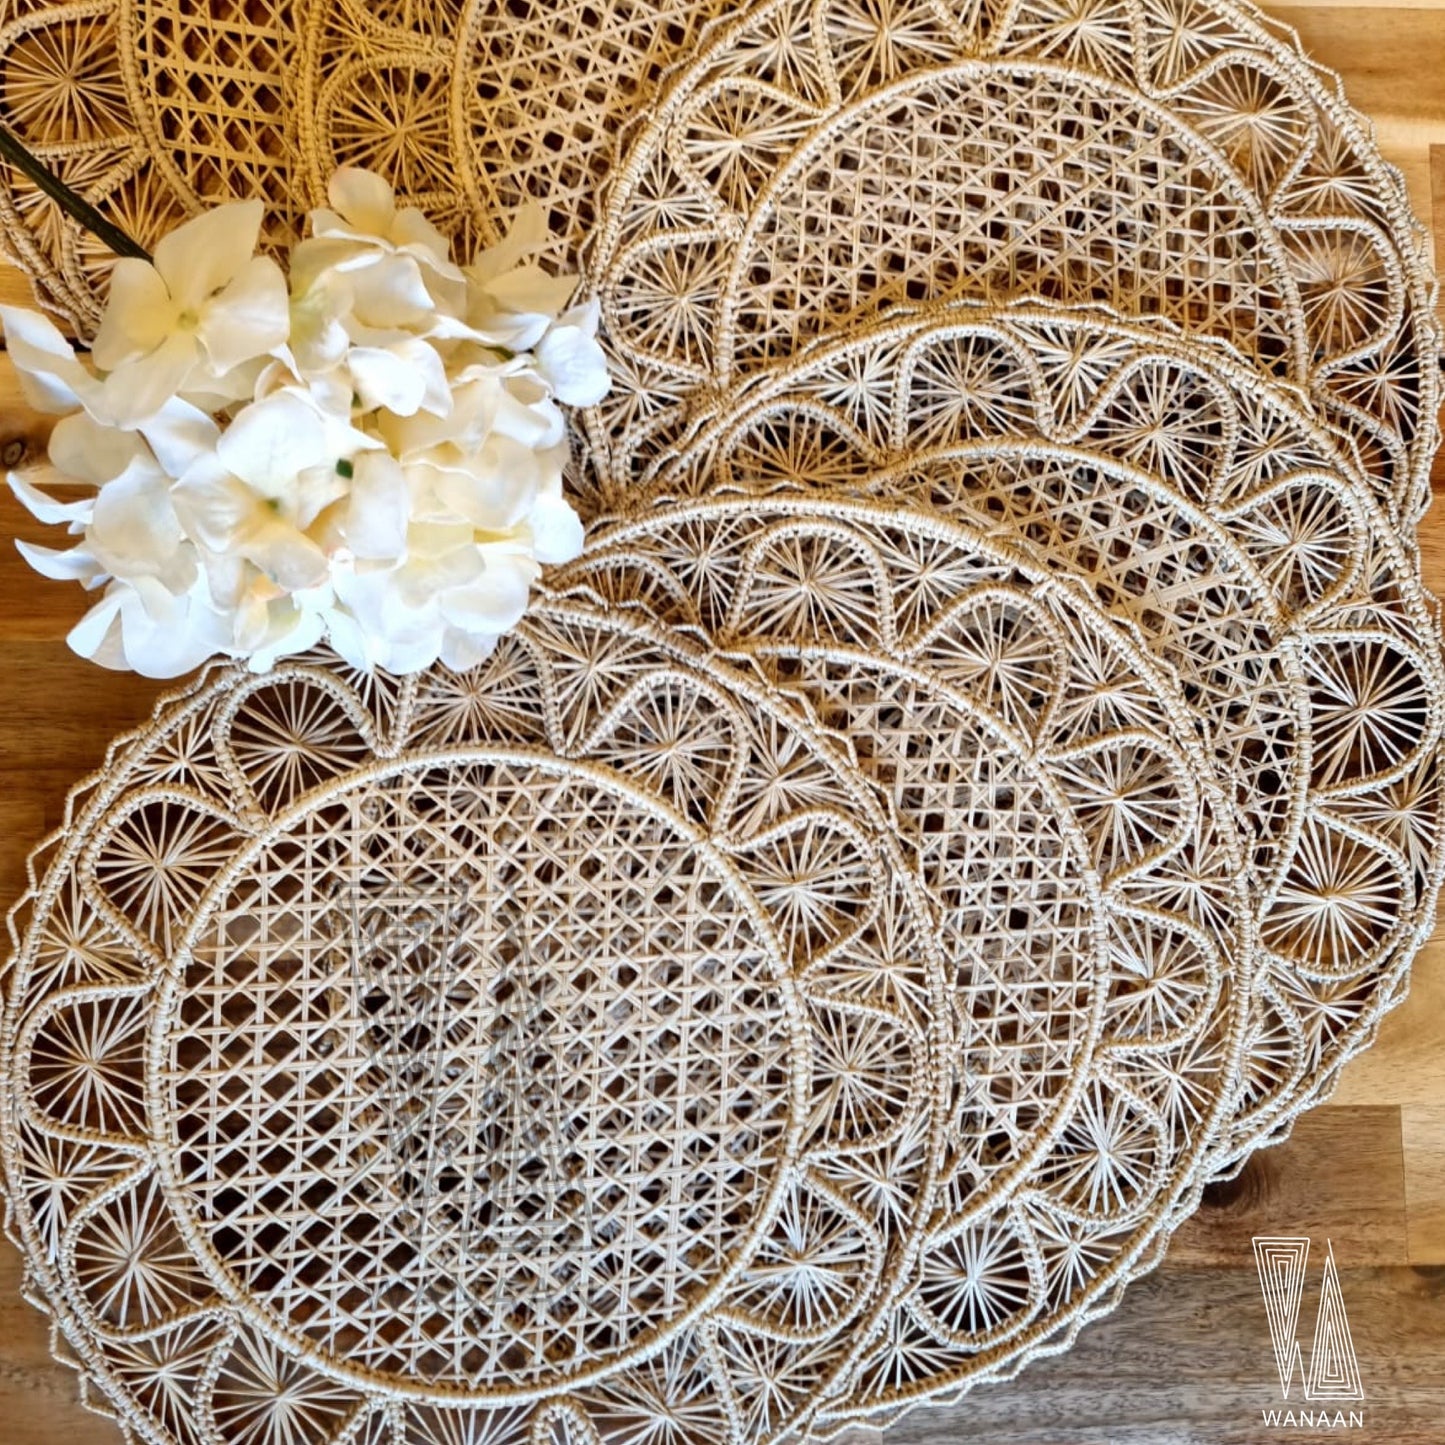 Cloudy Placemat Style, Handmade Iraca Palm Placemat, Table Decoration, Boho Table Setting from Colombia - Set of 4 or 6 Placemats